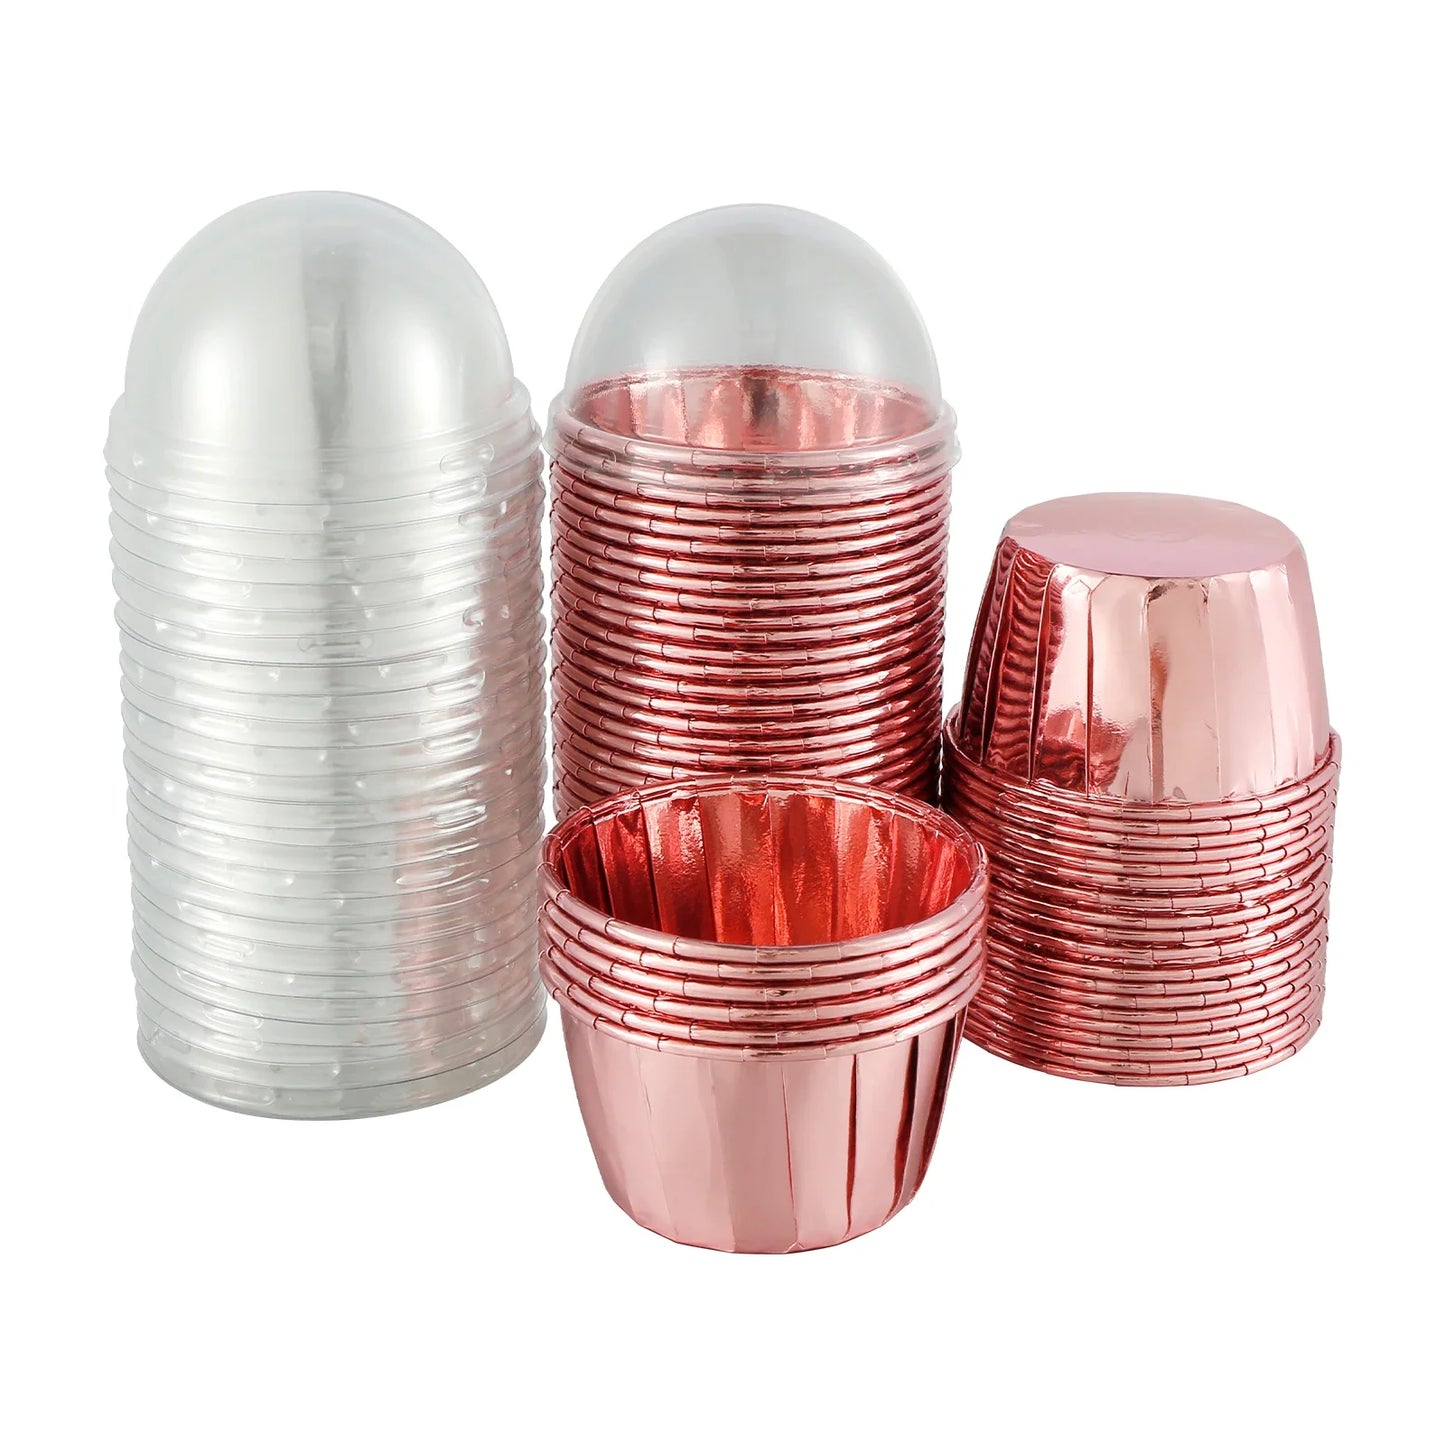 50Pc Foil Cupcake Liners with Lids